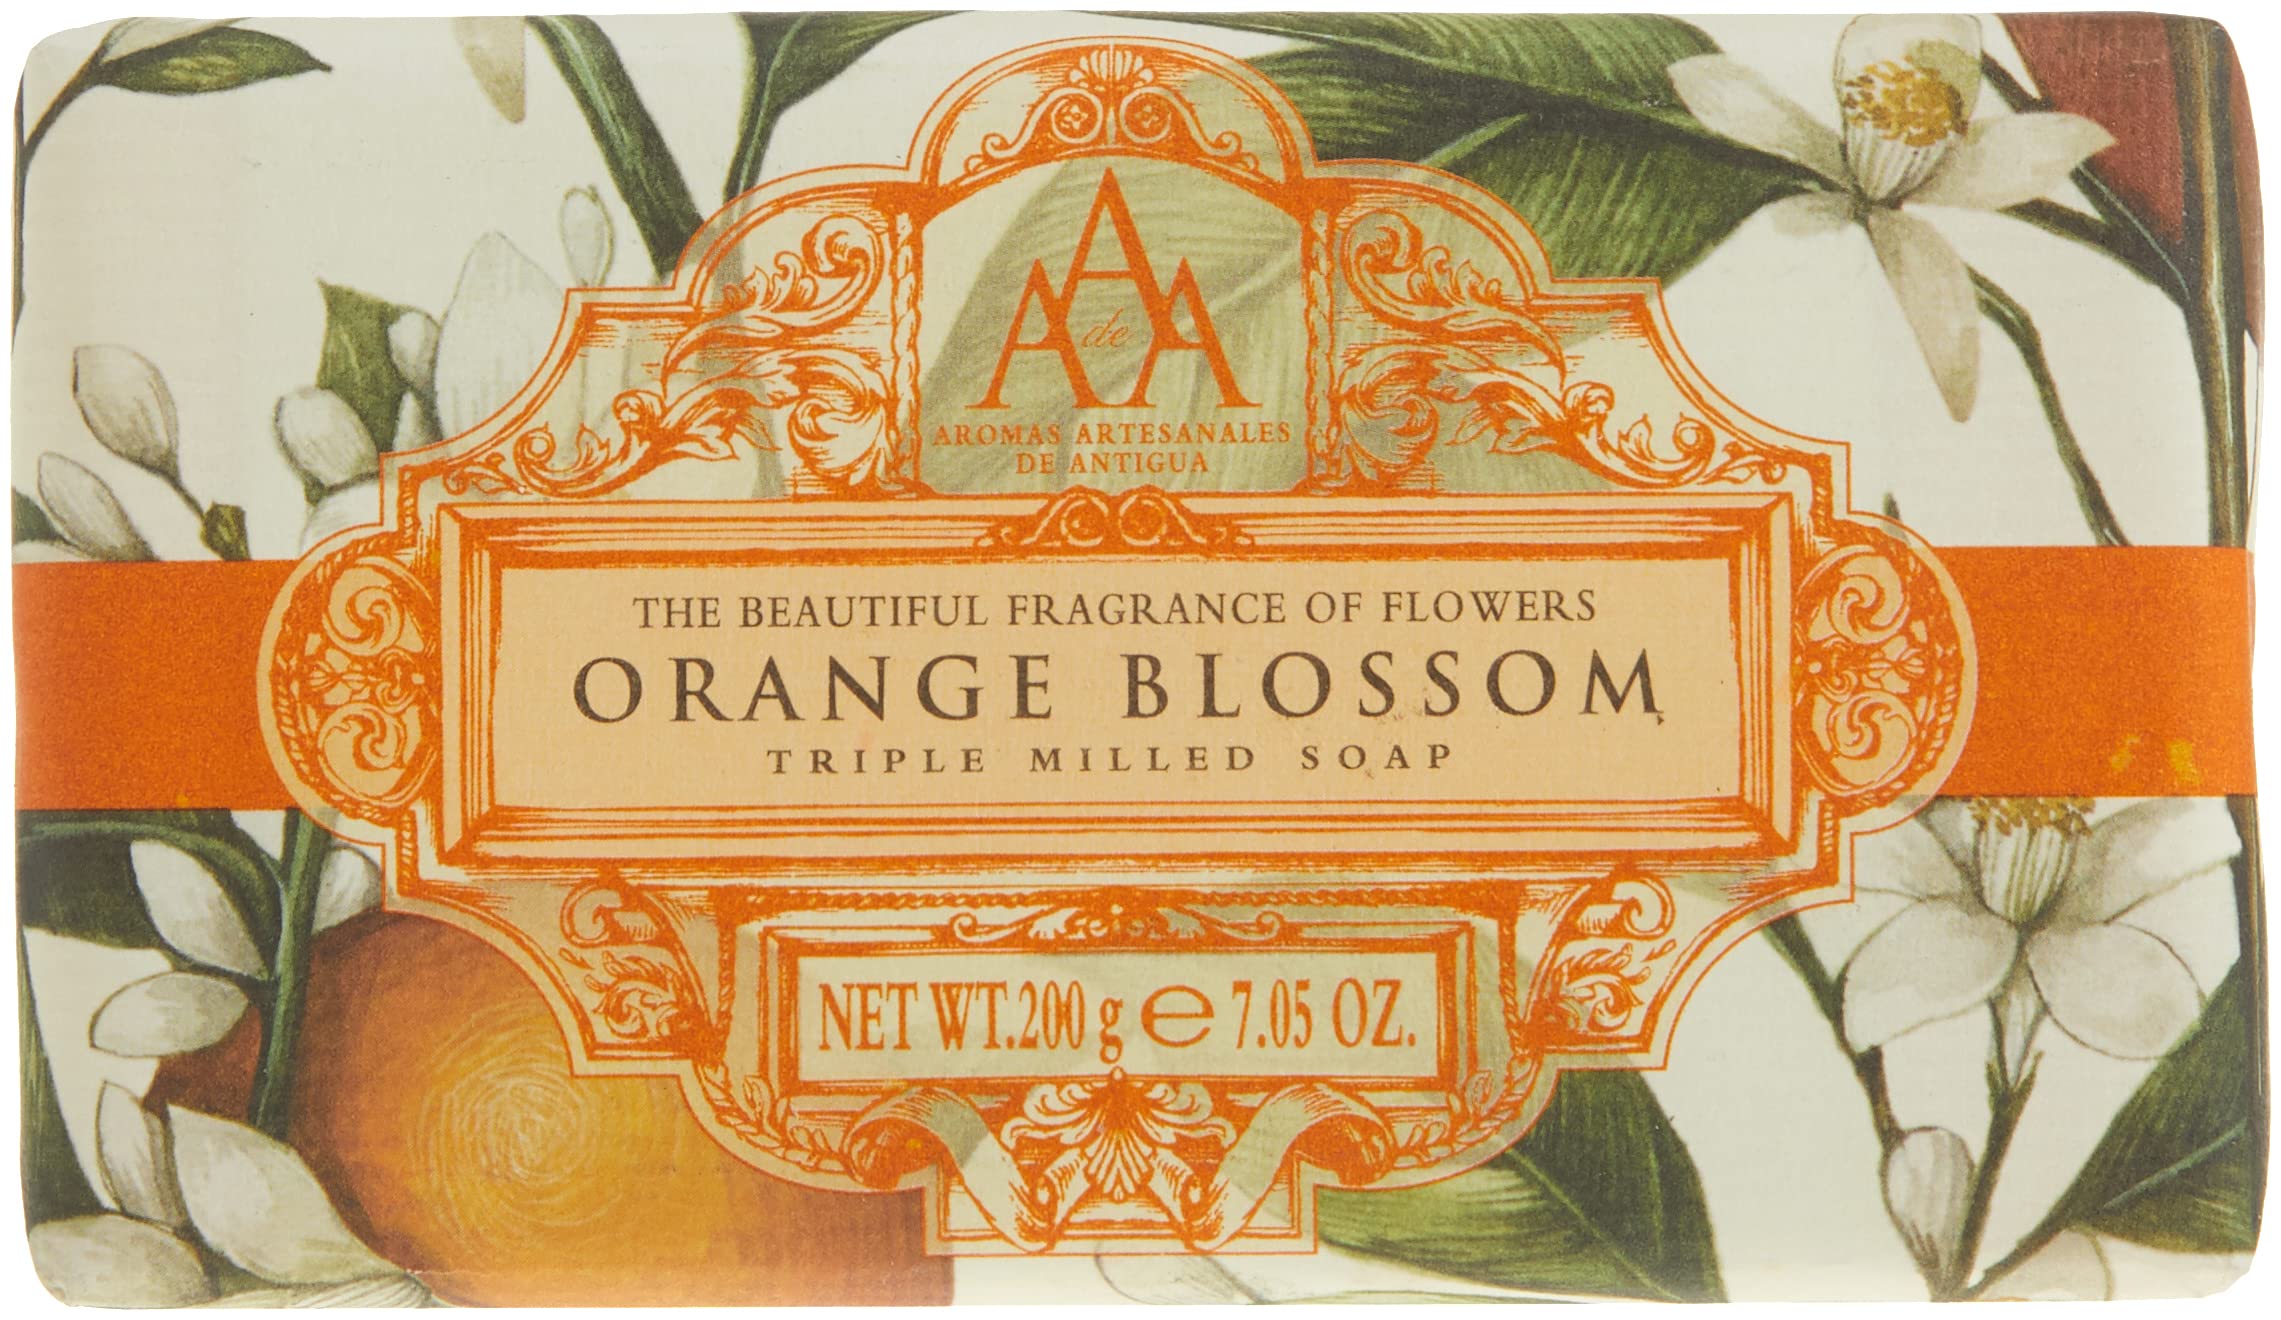 AAA Floral - Triple-Milled Luxury Soap Bar - Orange Blossom - 200 g / 7 oz (SLS and Paraben Free)